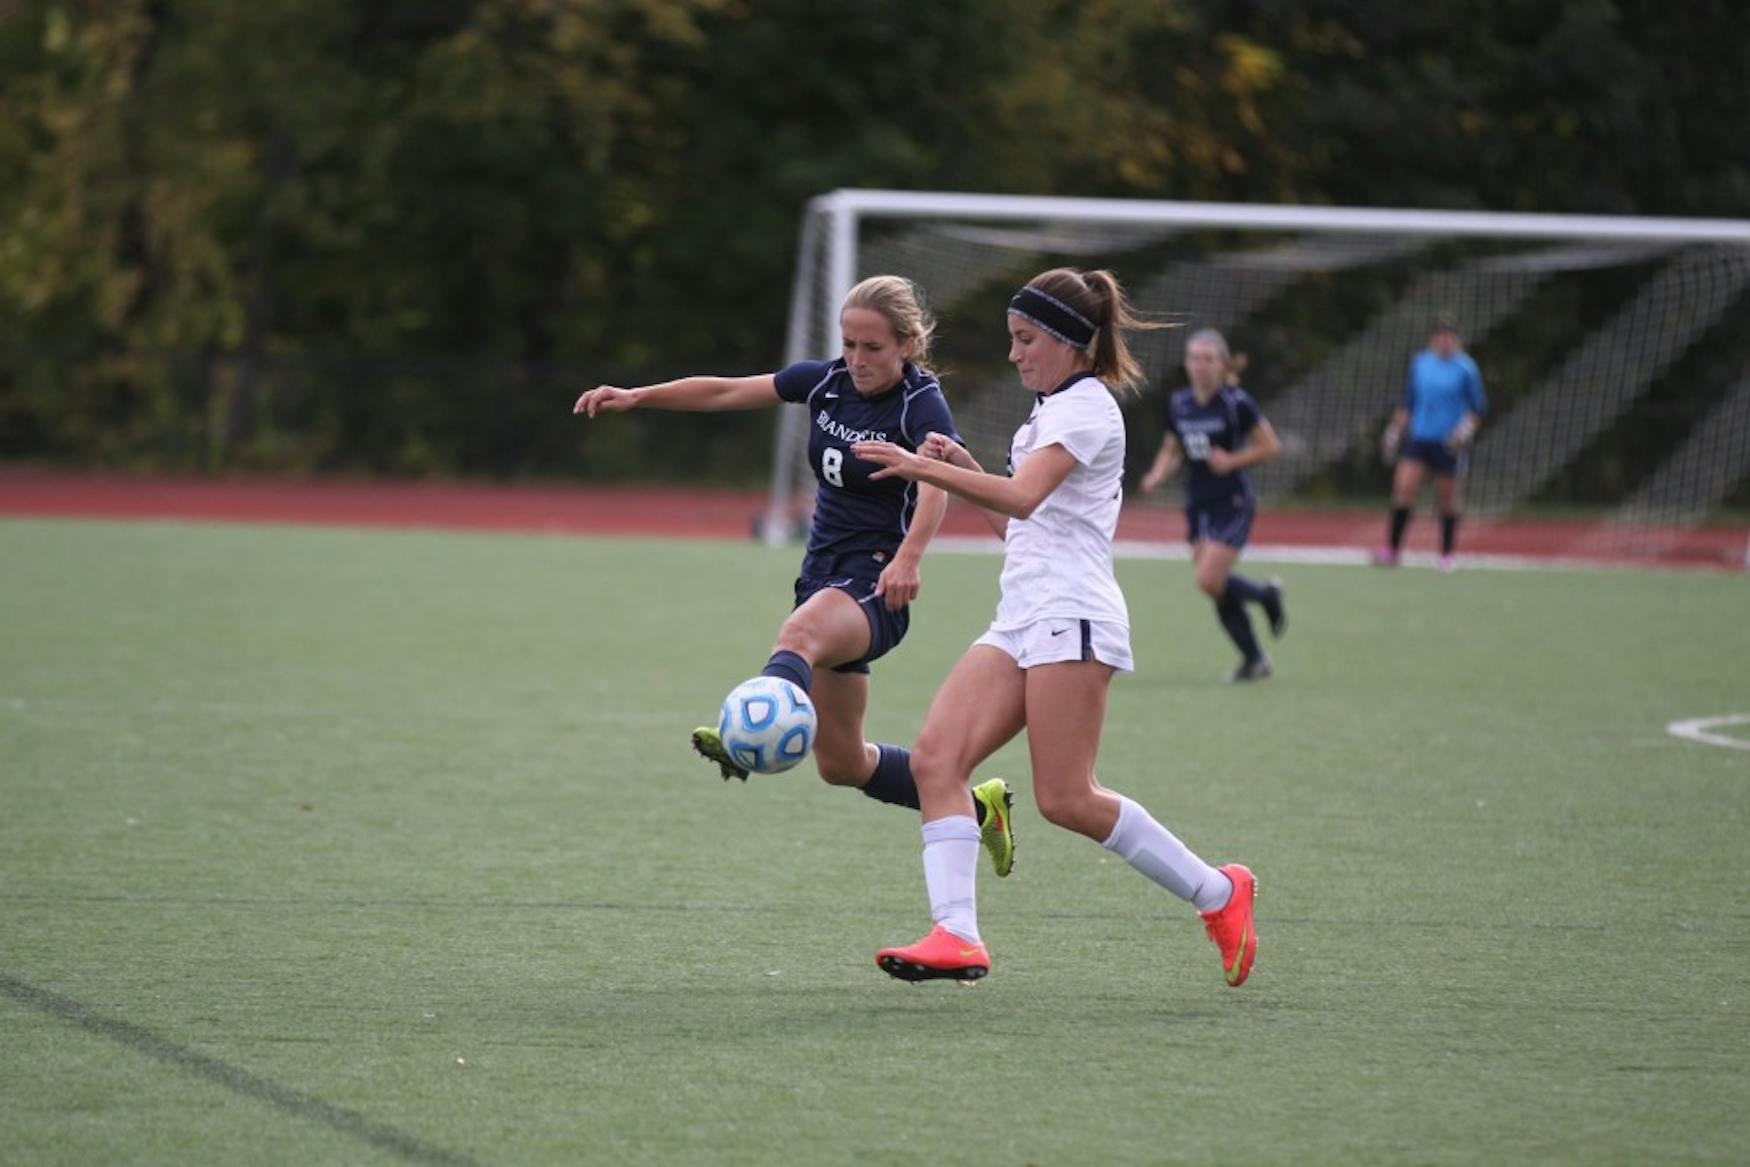 UP IN THE AIR: Forward Haliana Burhans ’18 (left) jumps to gain conrol of the ball from an Emory University defender on Sunday.